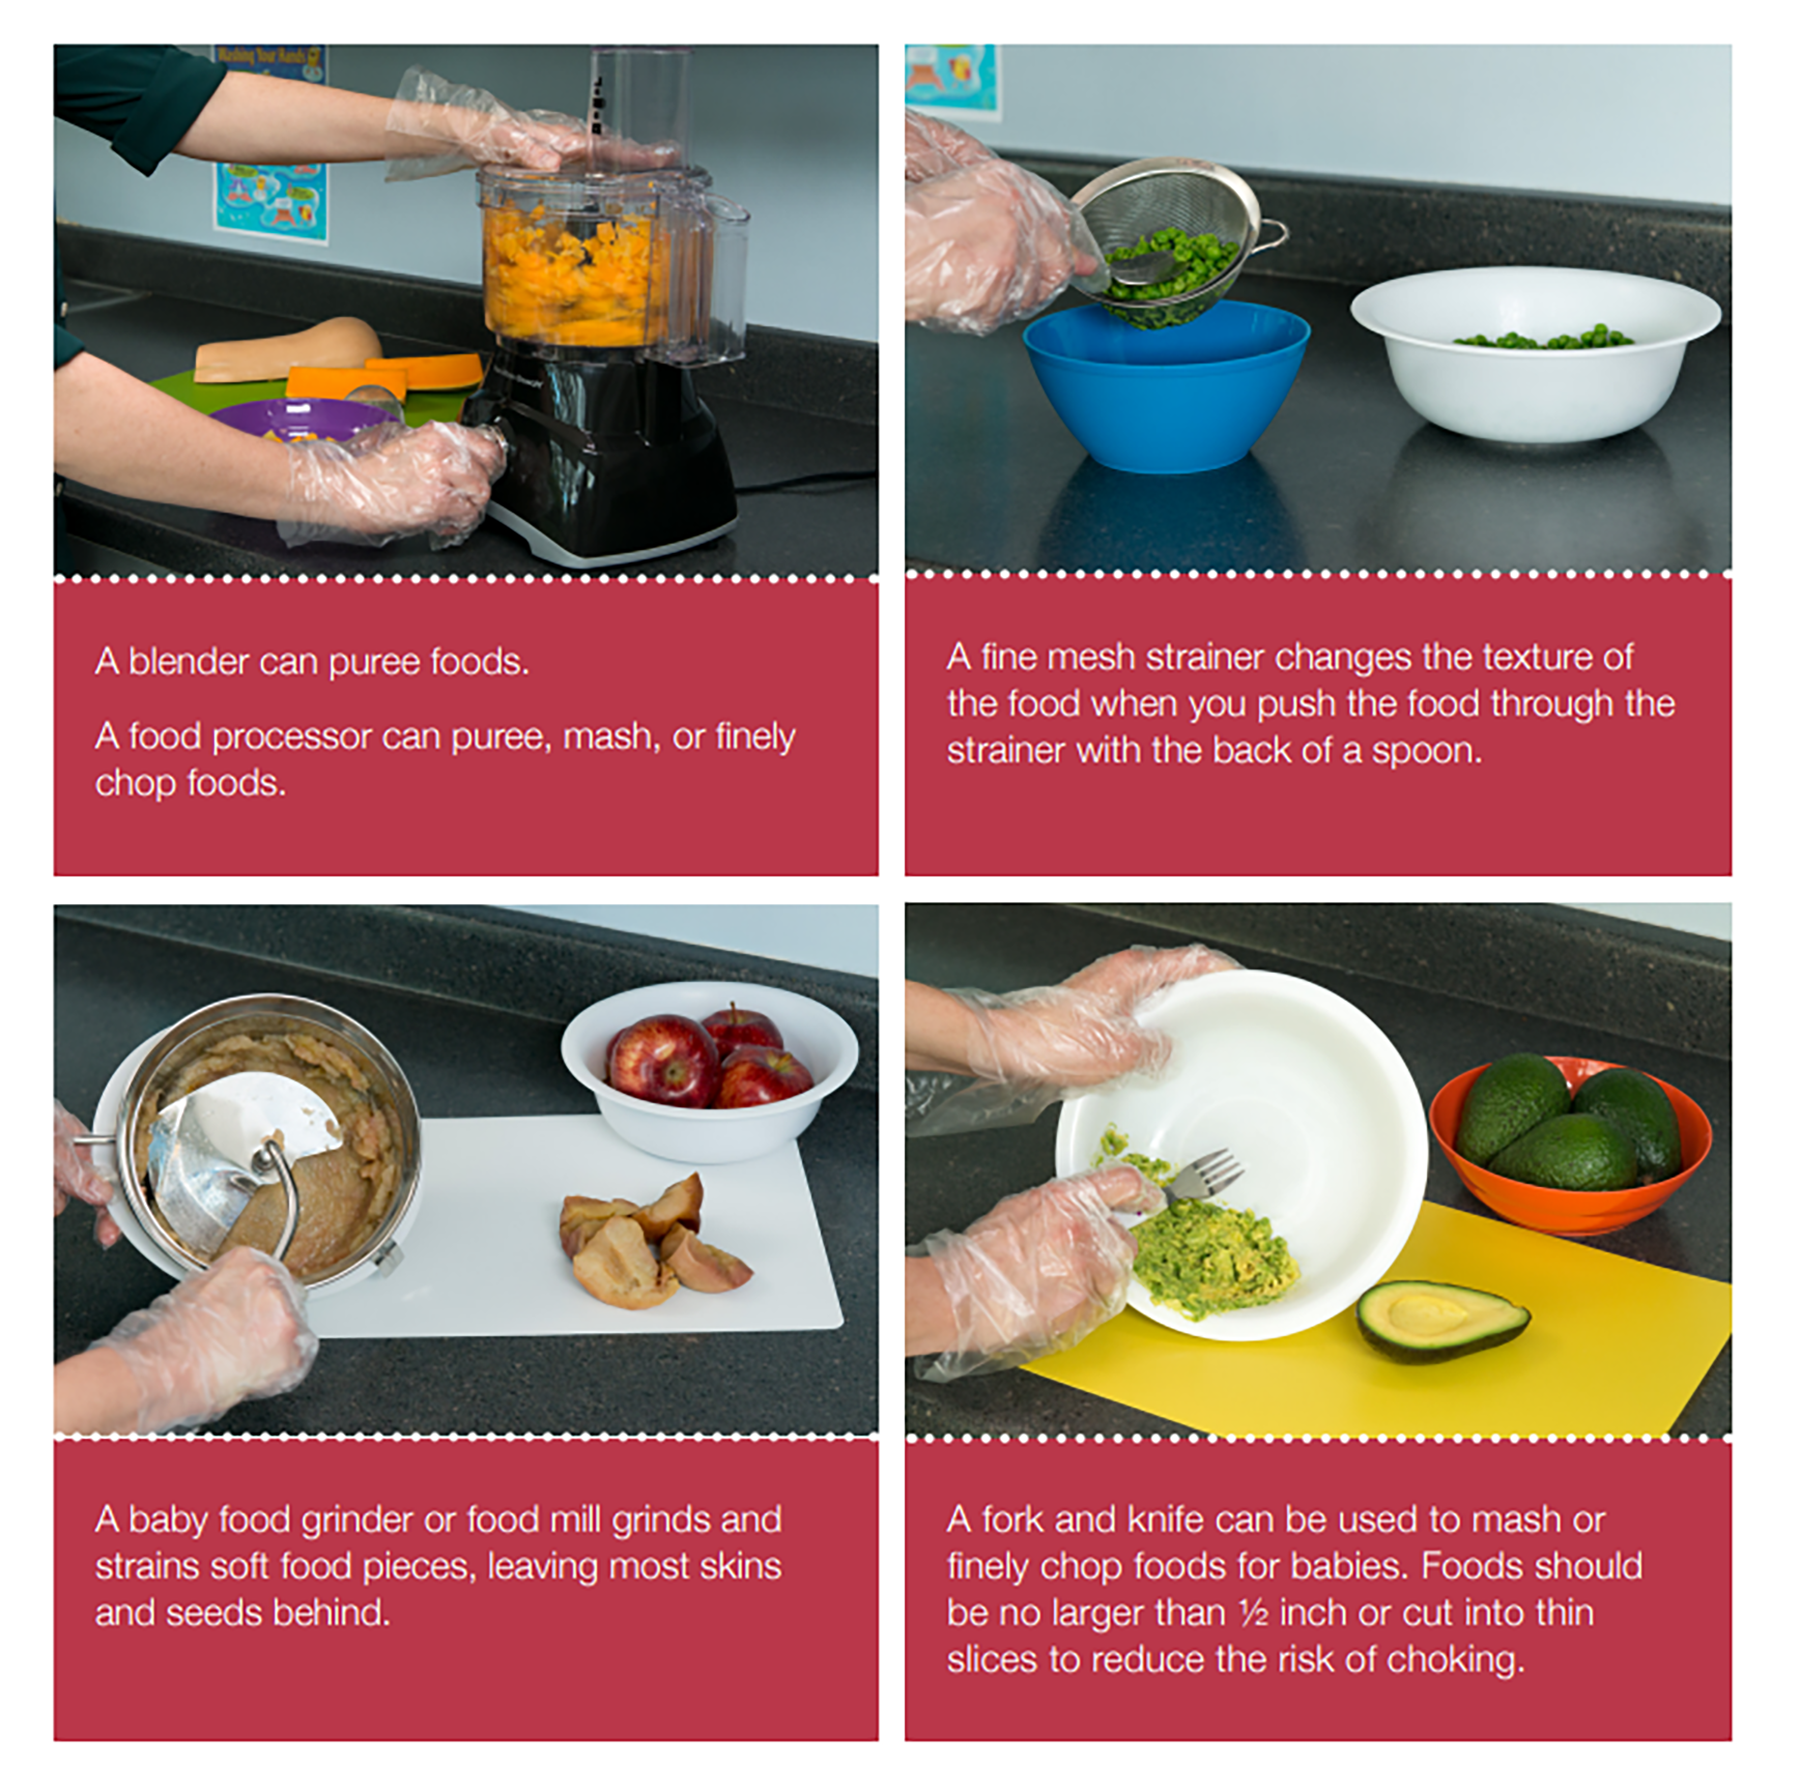 Flyer demonstrating how to make baby food from fruit and vegetables